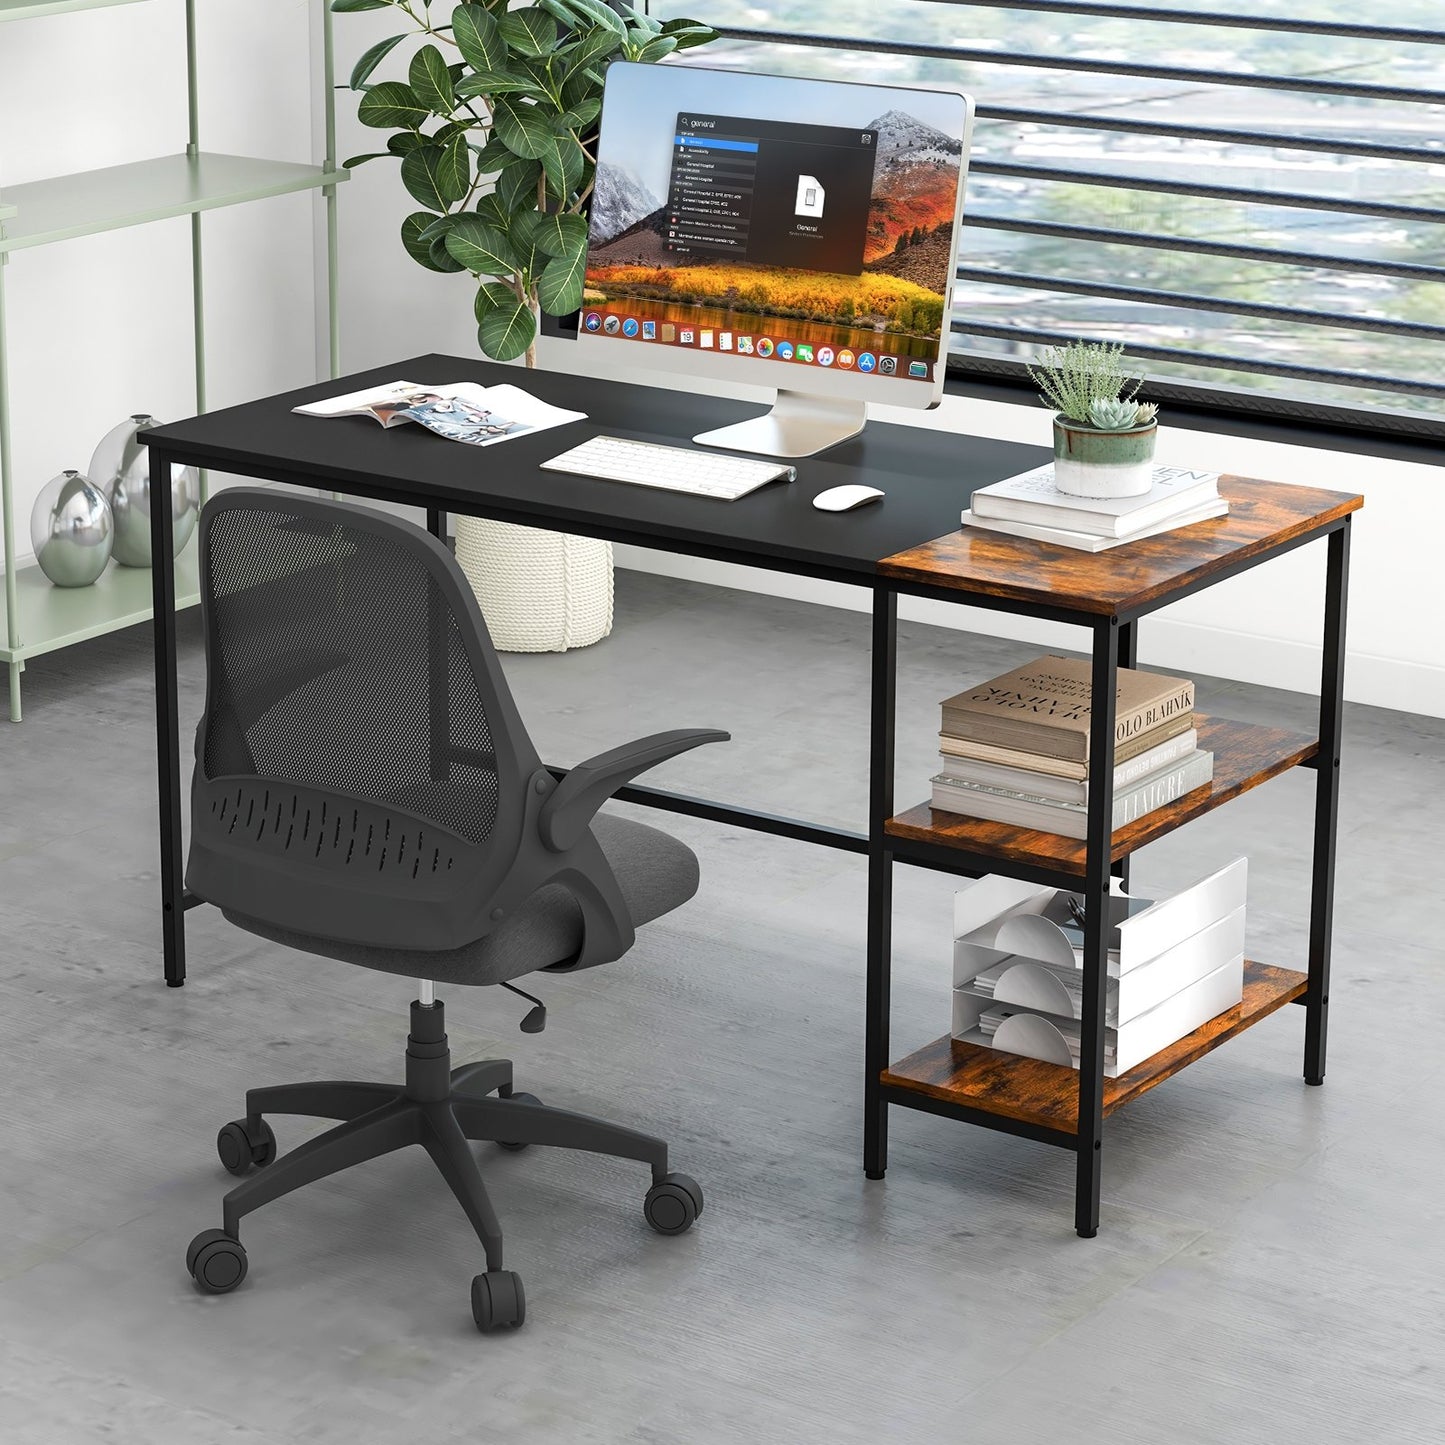 55" Modern Industrial Style Study Writing Desk with 2 Storage Shelves, Black